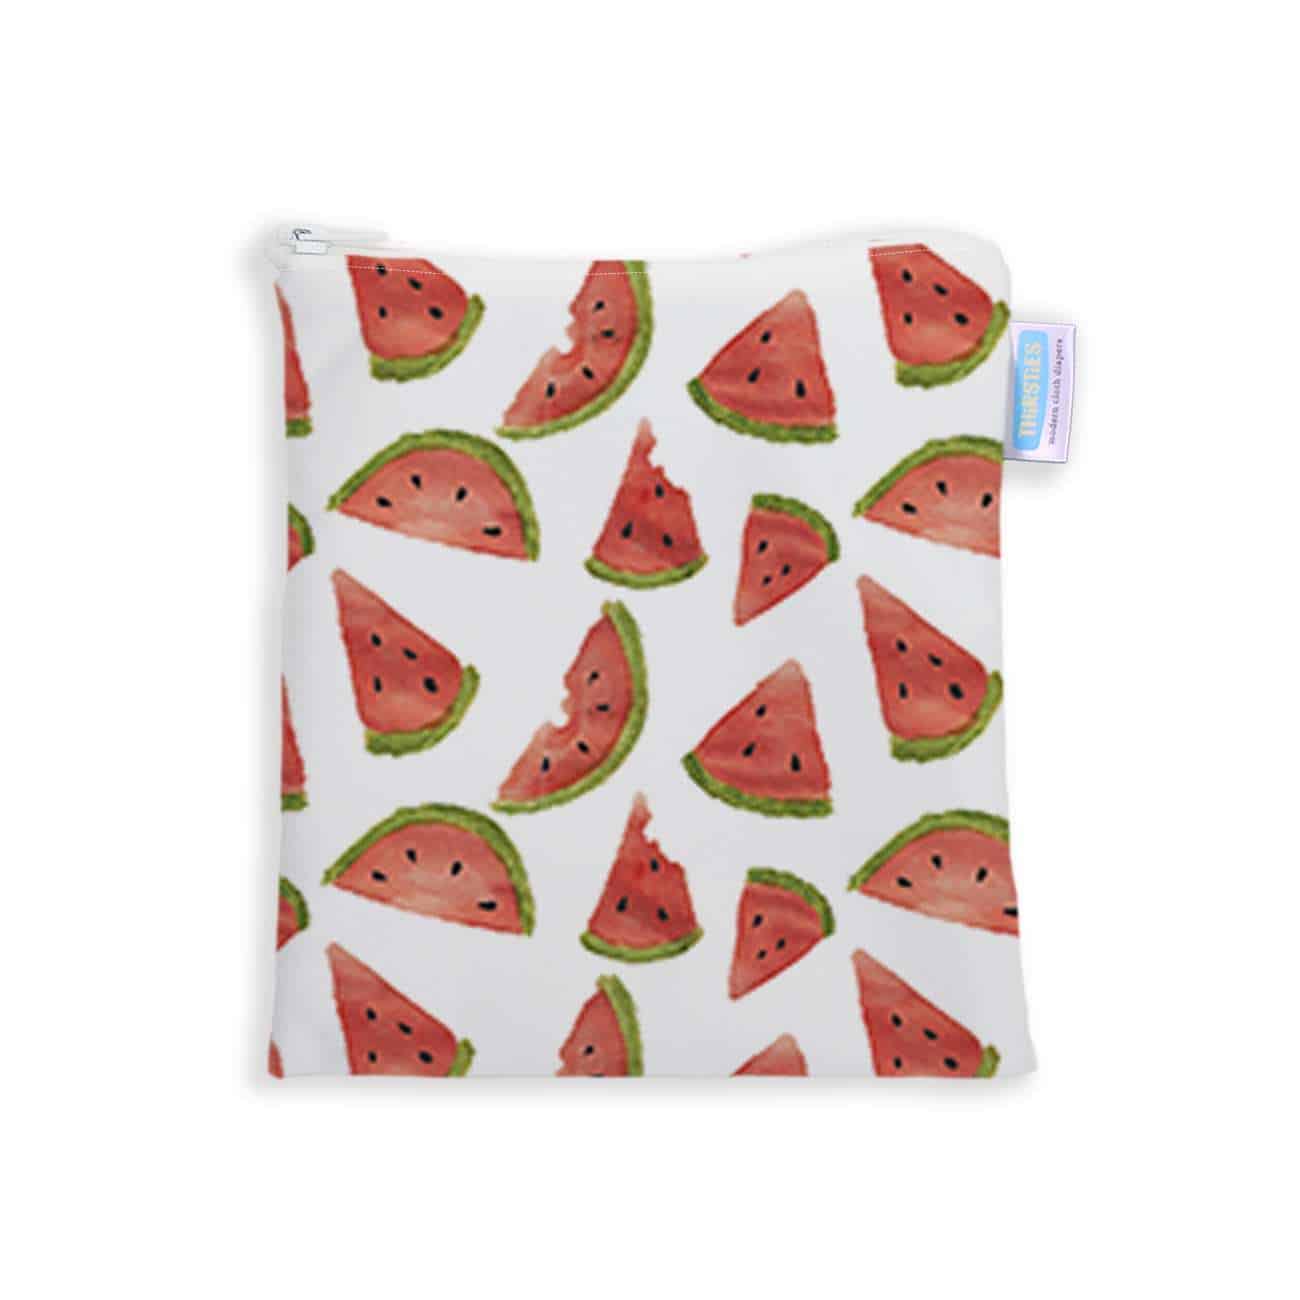 Thirsties Sandwich & Snack Bag -Melon Party